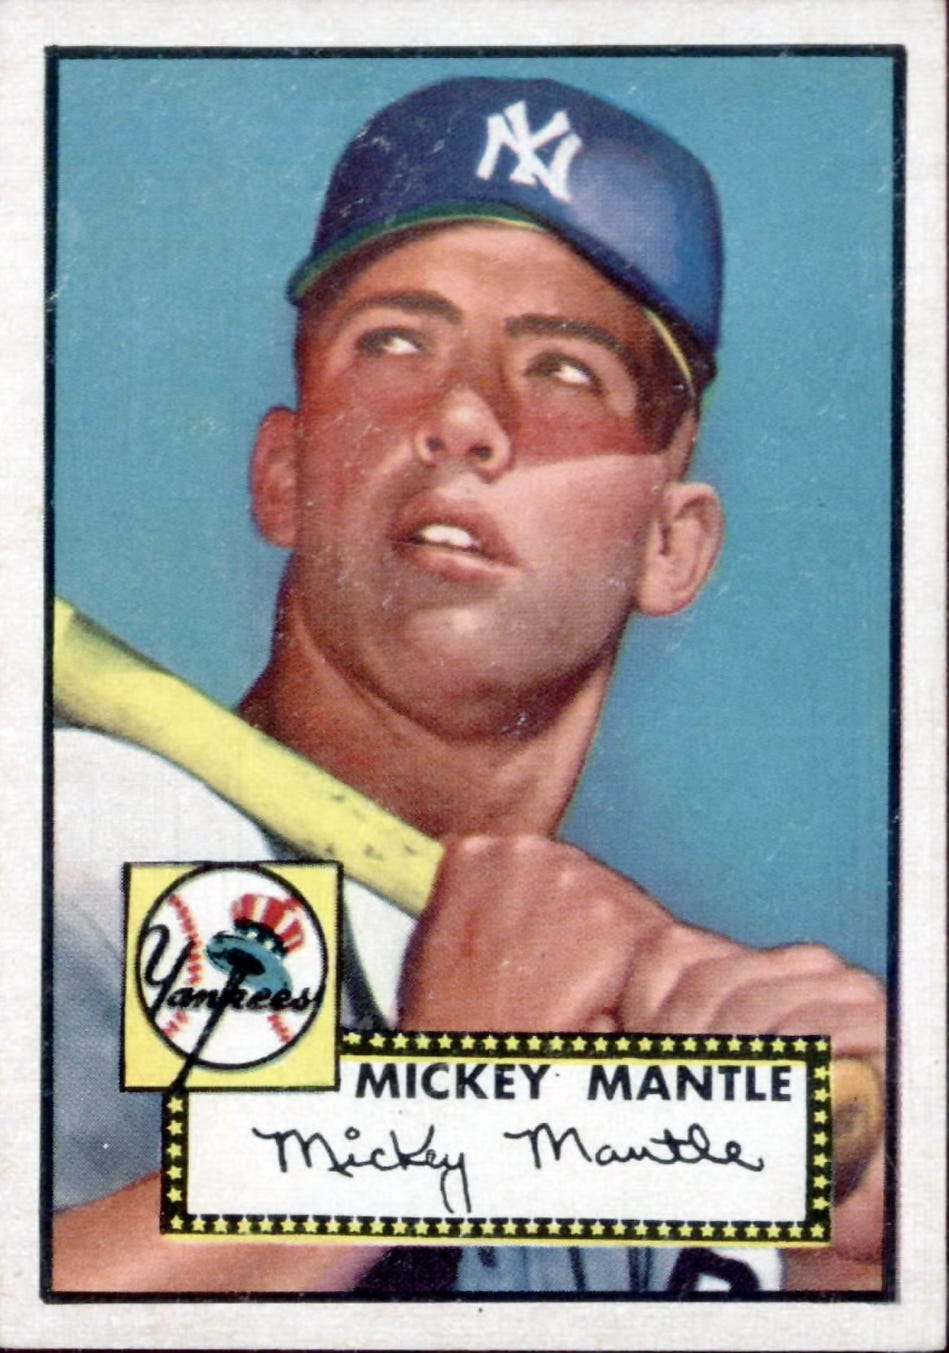 1952 Mickey Mantle baseball card sells for near-record $2.88 million